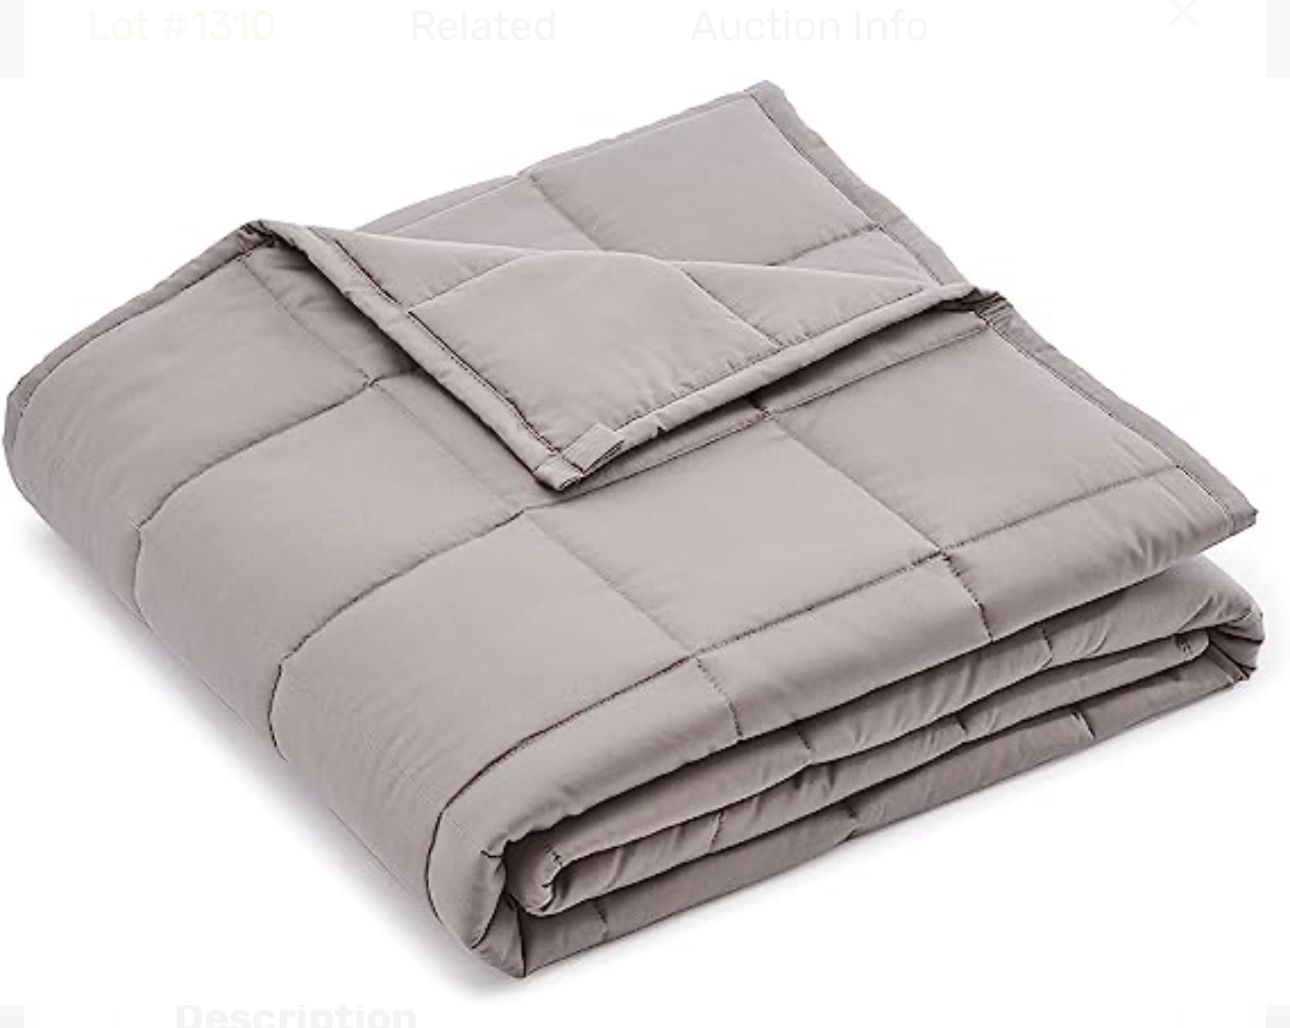 15lbs Weighted Blanket